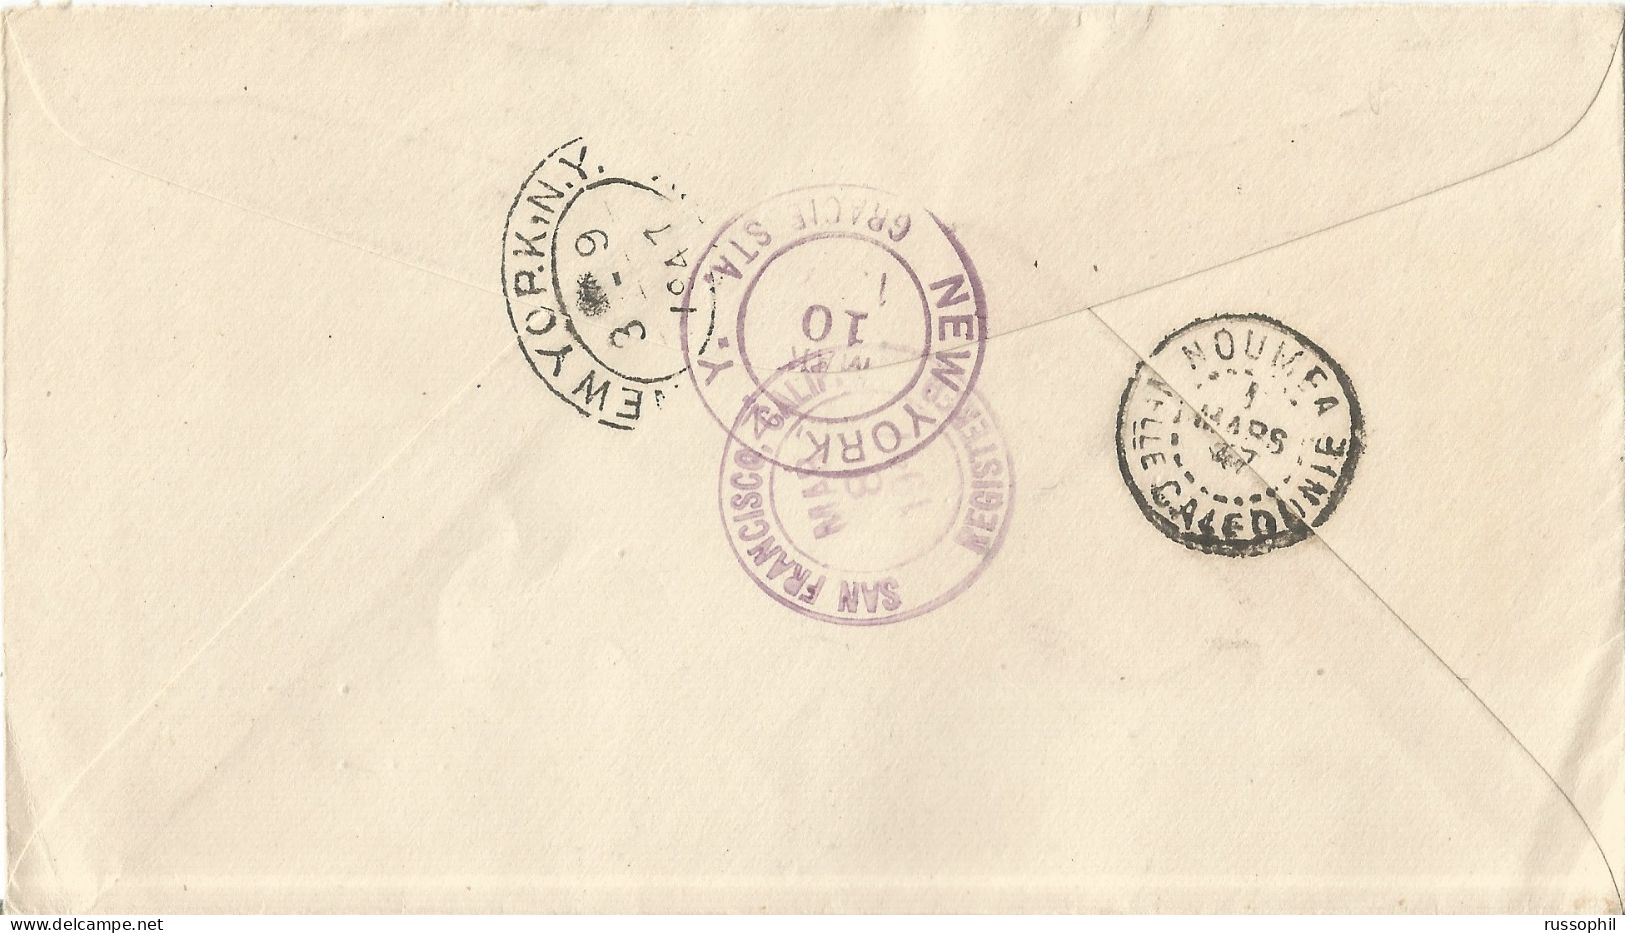 WALLIS AND FUTUNA - 60 FR FRANKING "FROM CHAD TO THE RHINE RIVER" ISSUE ON REGISTERED COVER TO THE USA - 1946 - Cartas & Documentos